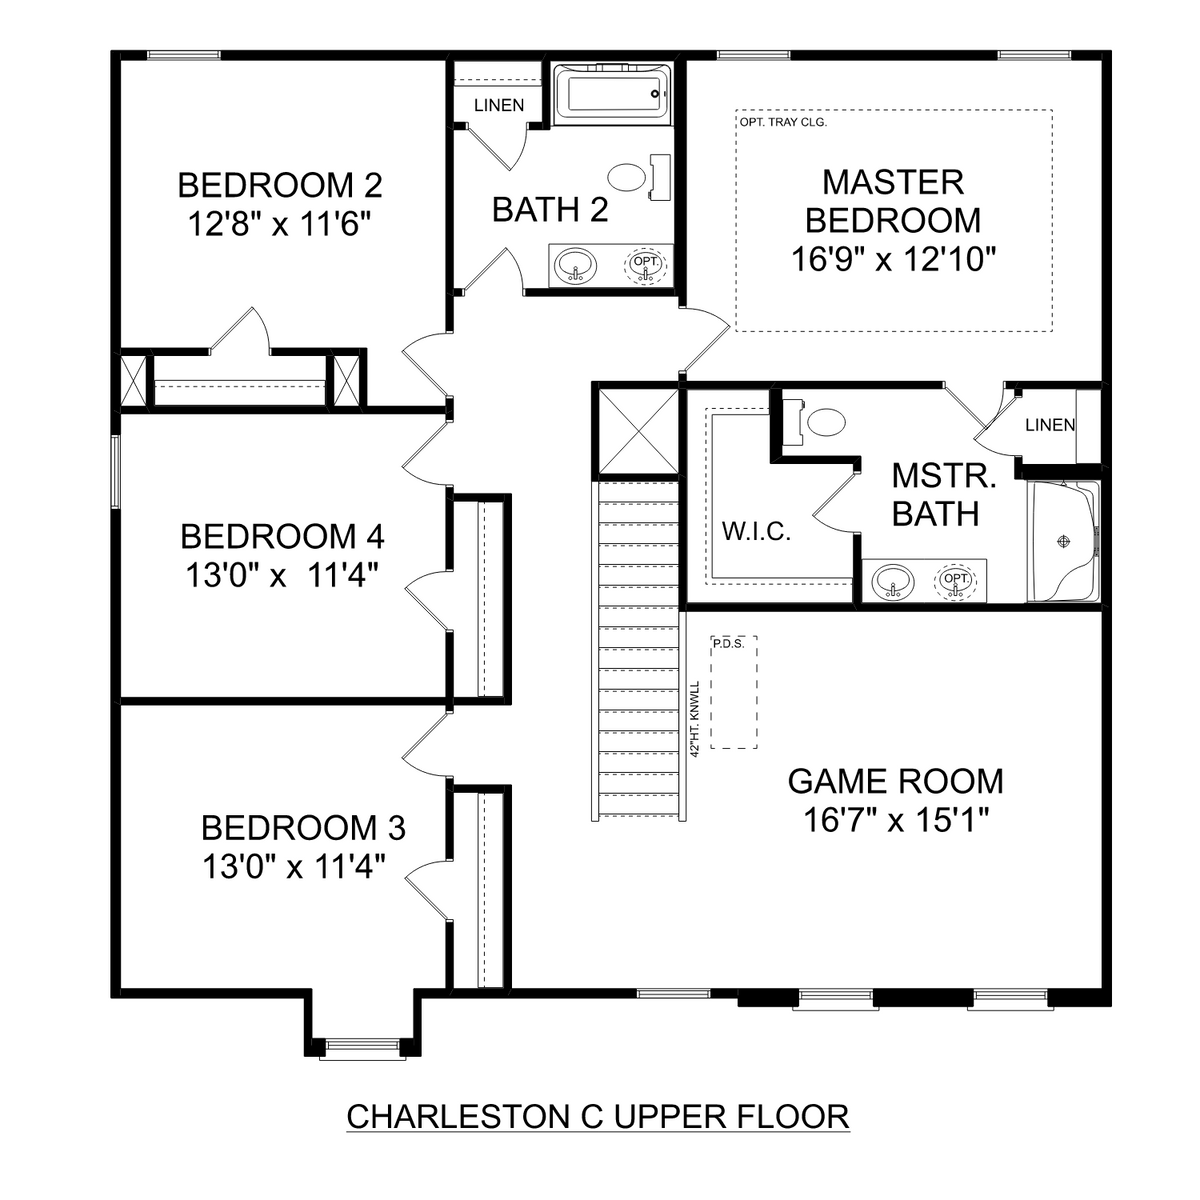 2 - The Charleston C floor plan layout for 145 Cherry Laurel Drive in Davidson Homes' Clearview community.